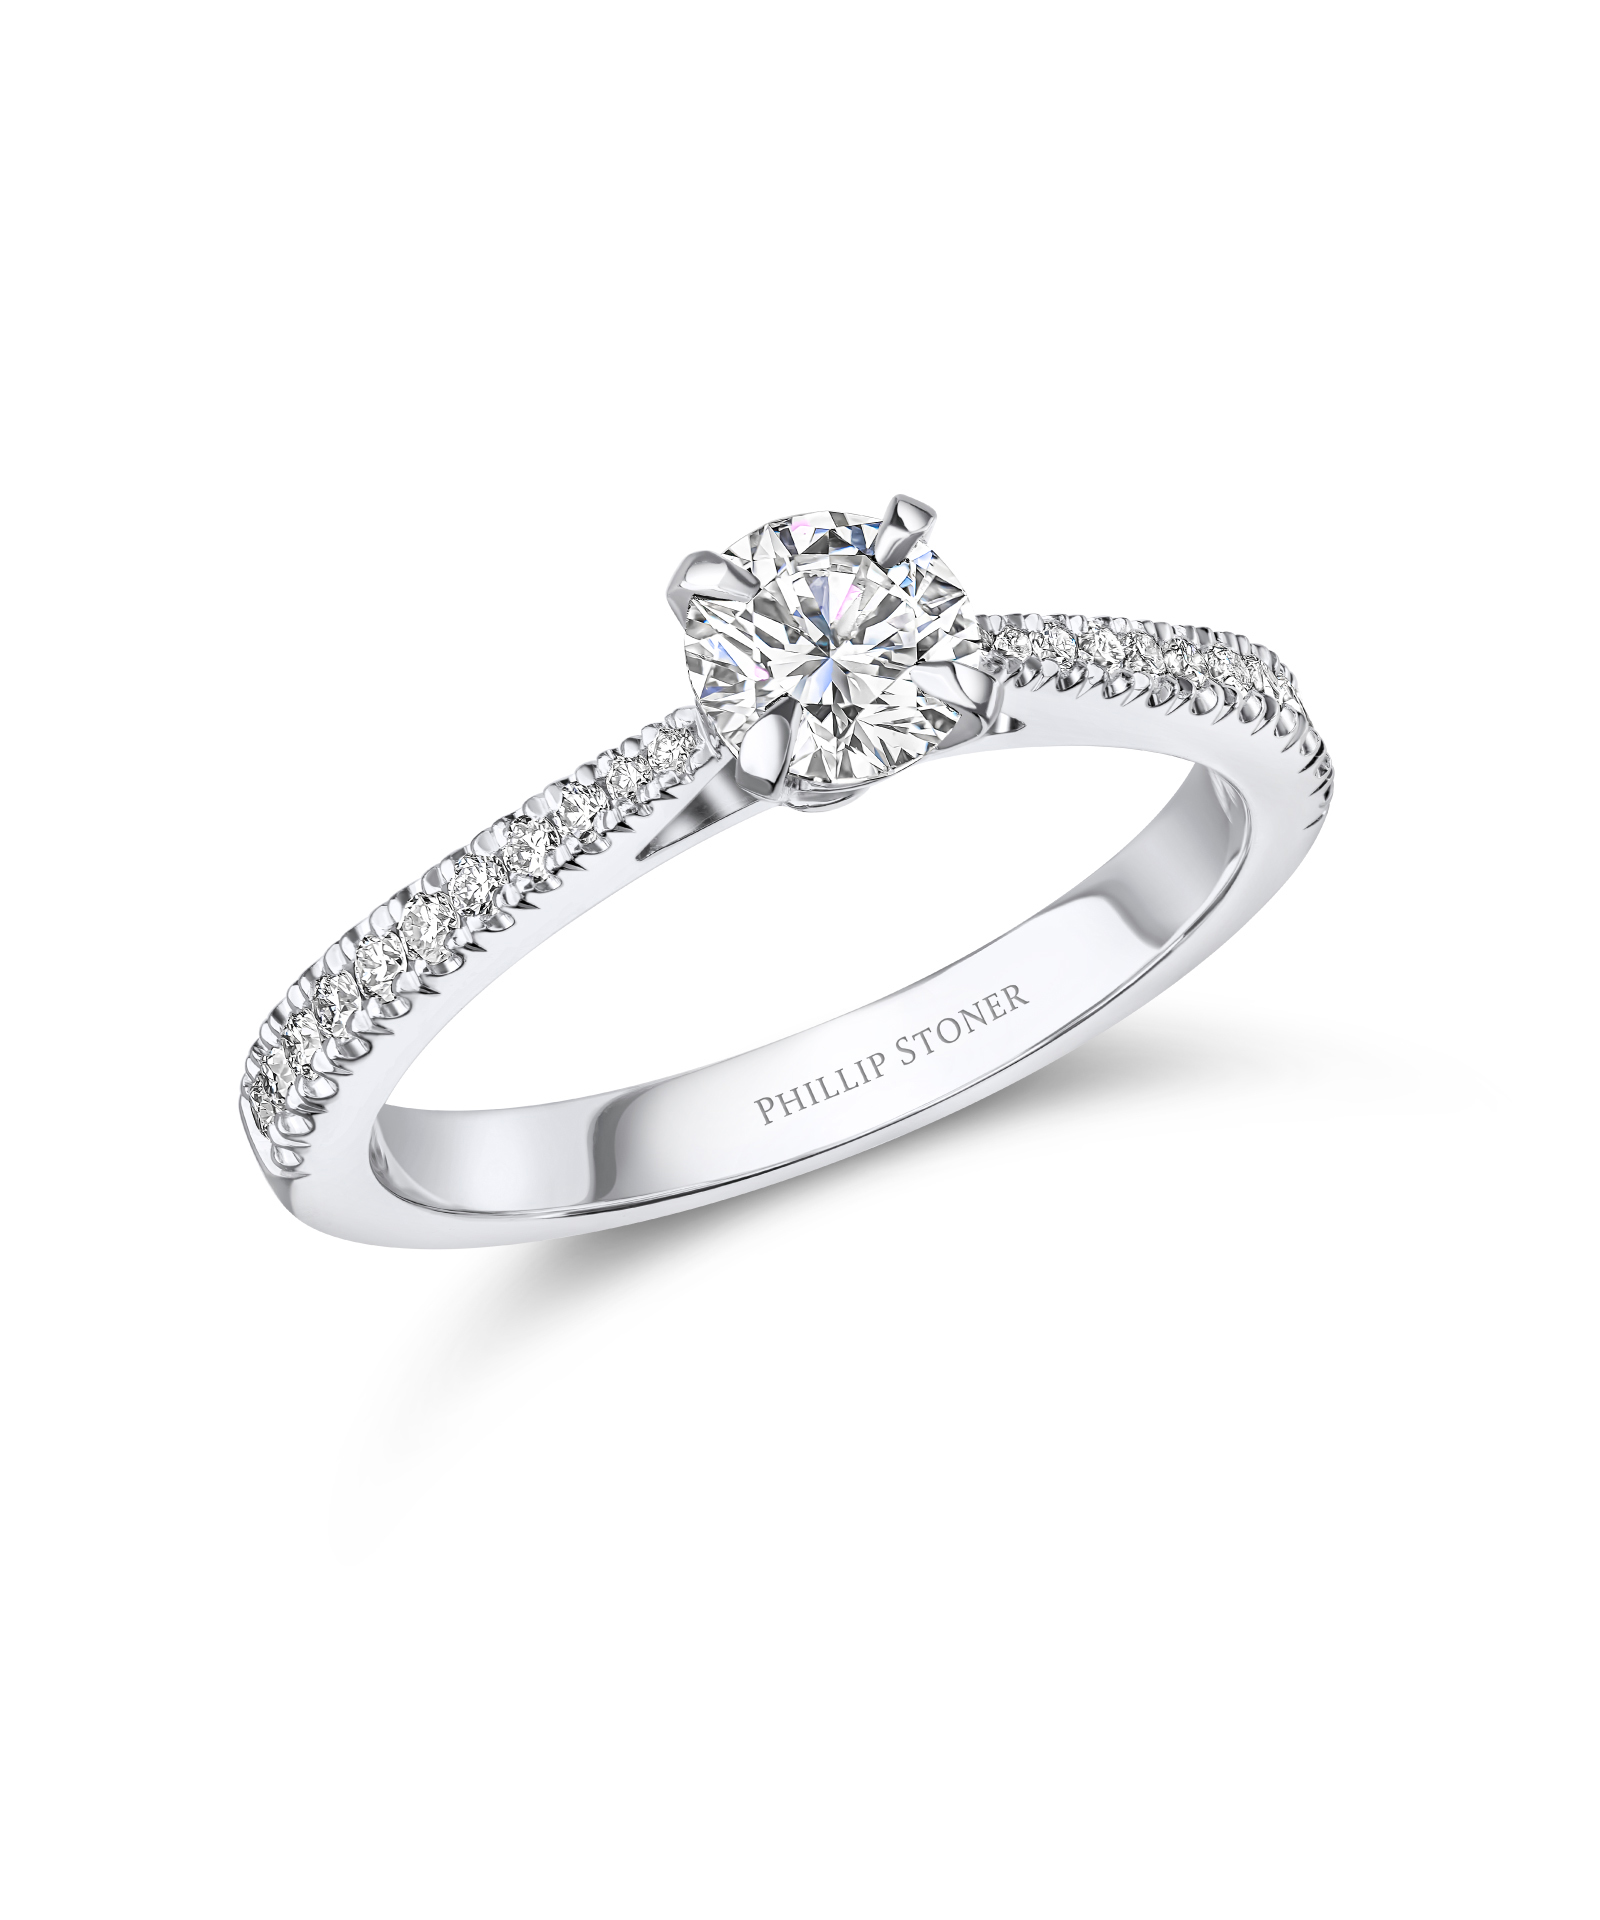 0.50ct Round Brilliant Cut Diamond Engagement Ring with Claw Set Shoulders - Phillip Stoner The Jeweller